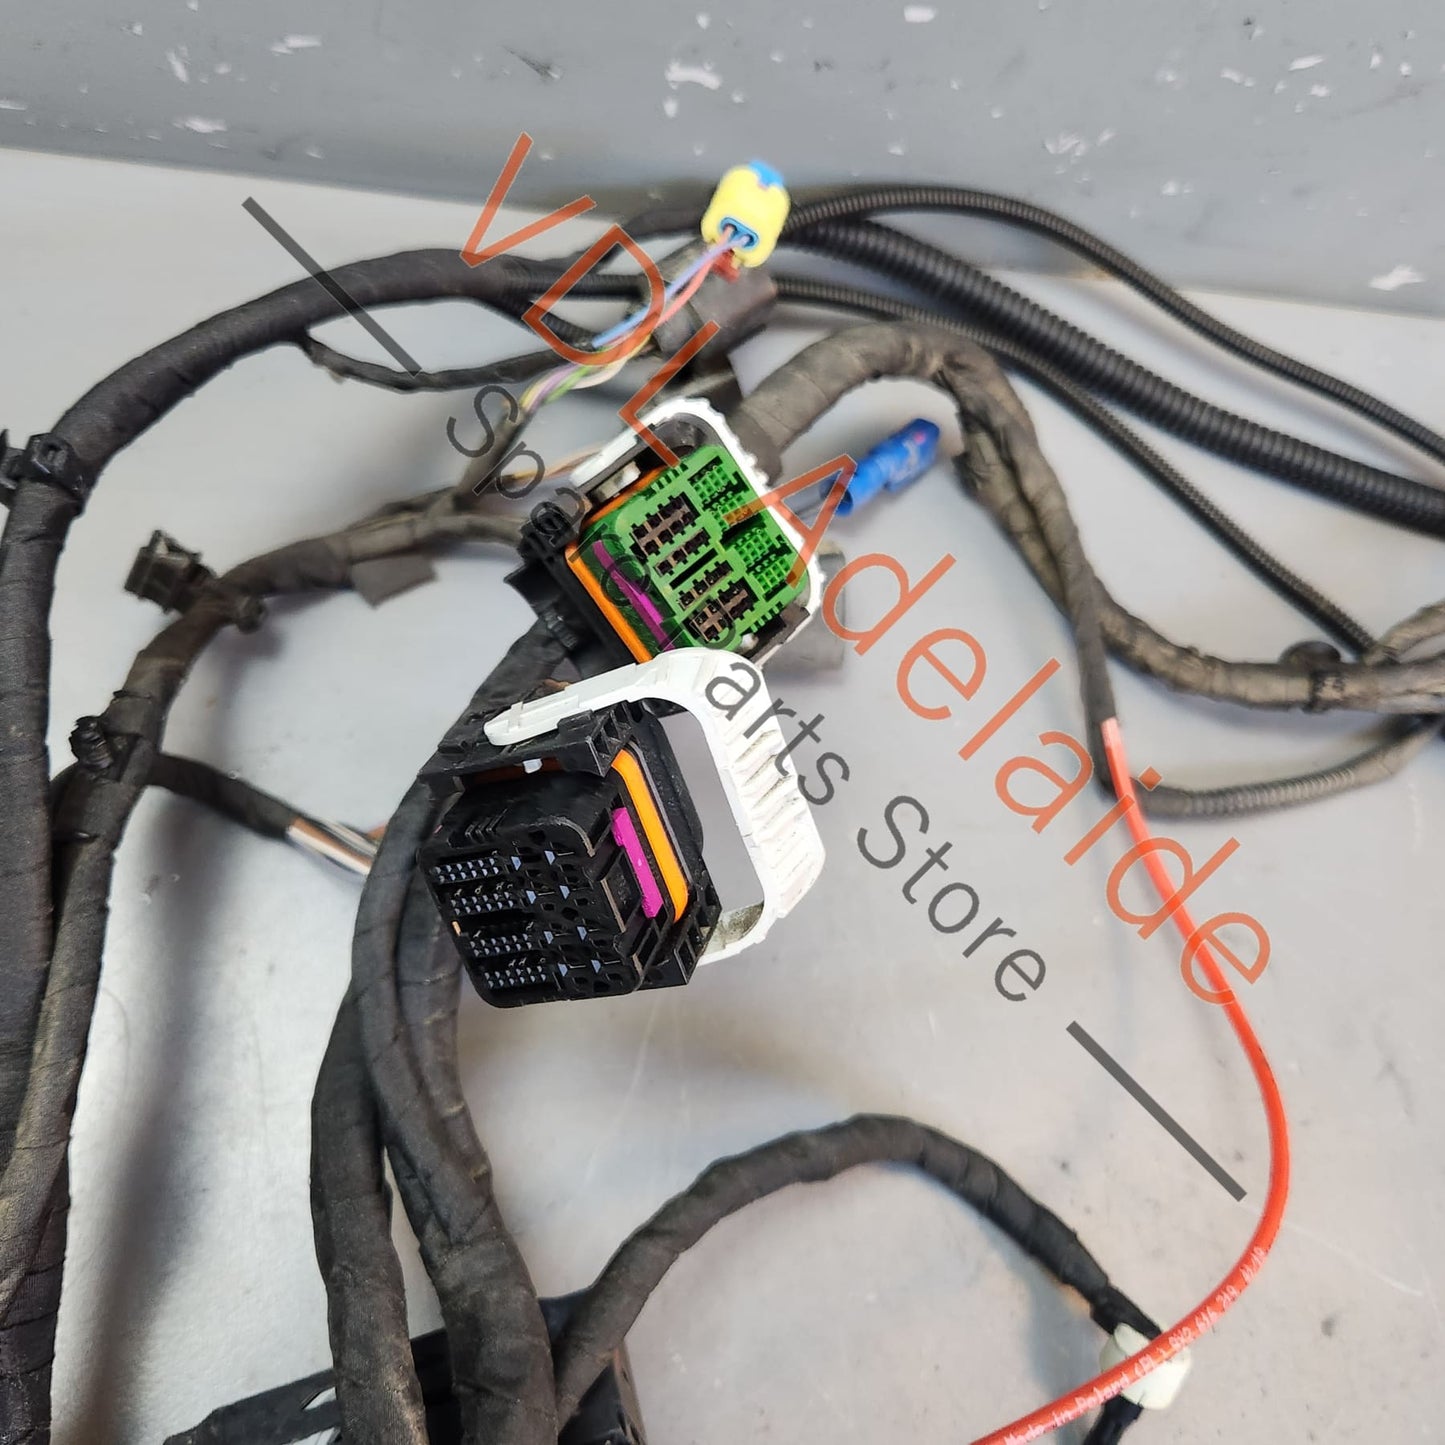 9Y0971071B 9Y0971071C   Porsche Cayenne E3 Front Left Engine Bay Wiring Harness Loom Cable Part Section 9Y0971071B & 9Y0971071C